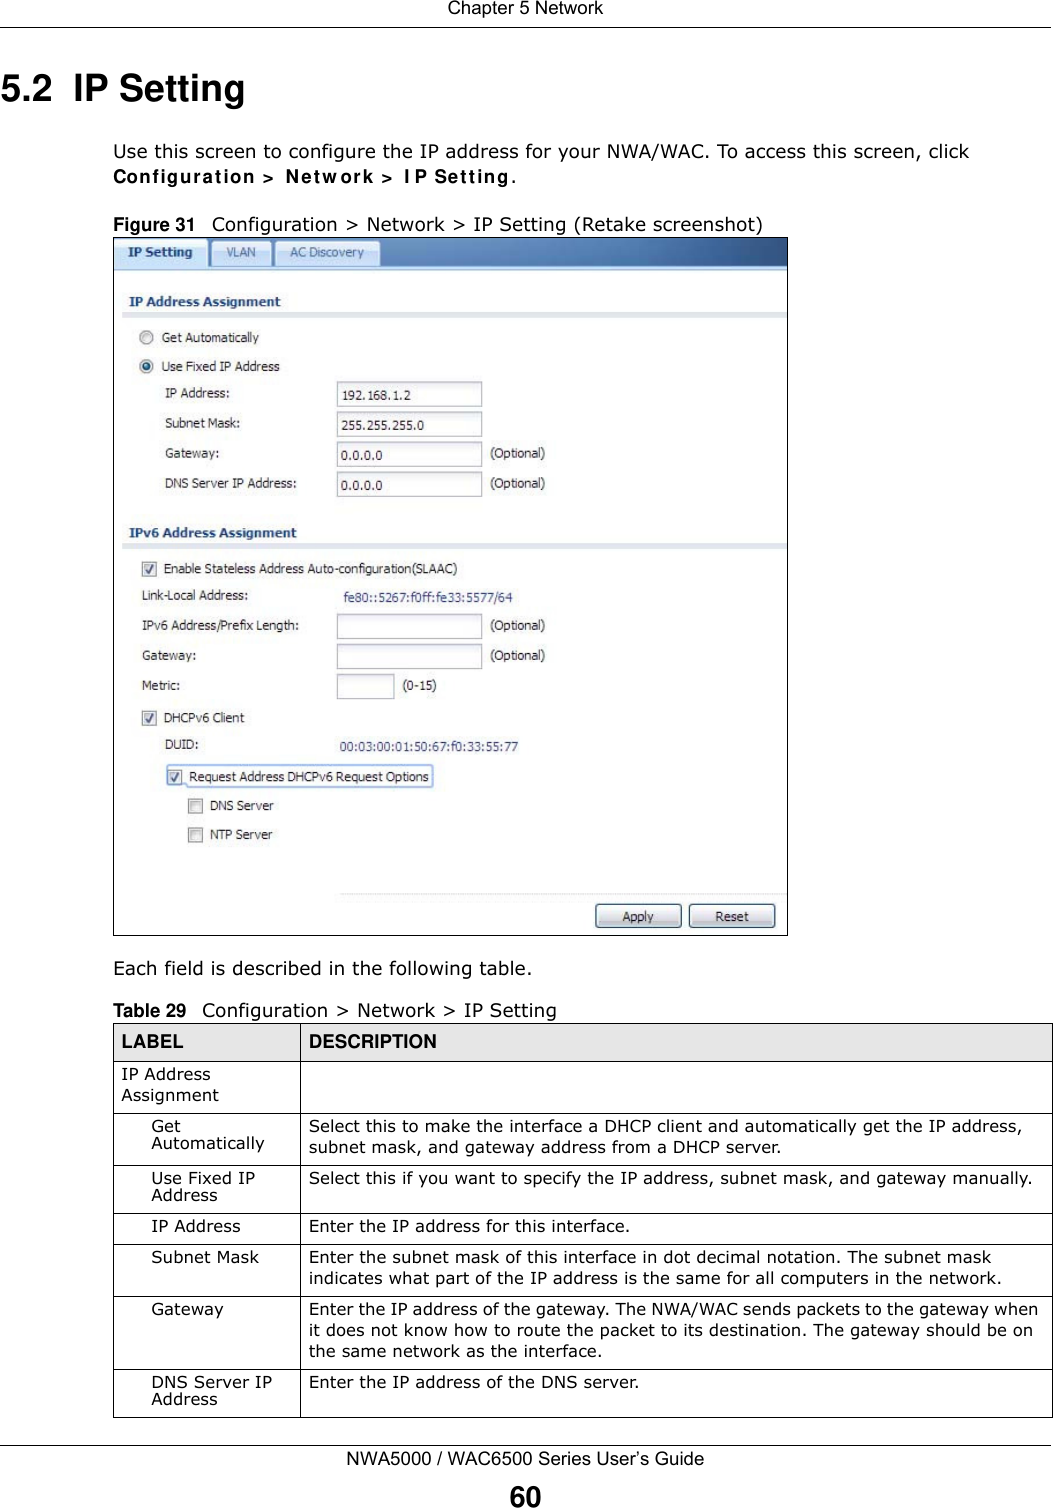 Chapter 5 NetworkNWA5000 / WAC6500 Series User’s Guide605.2  IP Setting Use this screen to configure the IP address for your NWA/WAC. To access this screen, click Configur at ion &gt;  Net w ork  &gt;  I P Se t ting.Figure 31   Configuration &gt; Network &gt; IP Setting (Retake screenshot)     Each field is described in the following table.  Table 29   Configuration &gt; Network &gt; IP SettingLABEL  DESCRIPTIONIP Address AssignmentGet Automatically Select this to make the interface a DHCP client and automatically get the IP address, subnet mask, and gateway address from a DHCP server.Use Fixed IP Address Select this if you want to specify the IP address, subnet mask, and gateway manually. IP Address Enter the IP address for this interface.Subnet Mask Enter the subnet mask of this interface in dot decimal notation. The subnet mask indicates what part of the IP address is the same for all computers in the network.Gateway Enter the IP address of the gateway. The NWA/WAC sends packets to the gateway when it does not know how to route the packet to its destination. The gateway should be on the same network as the interface.DNS Server IP Address Enter the IP address of the DNS server.